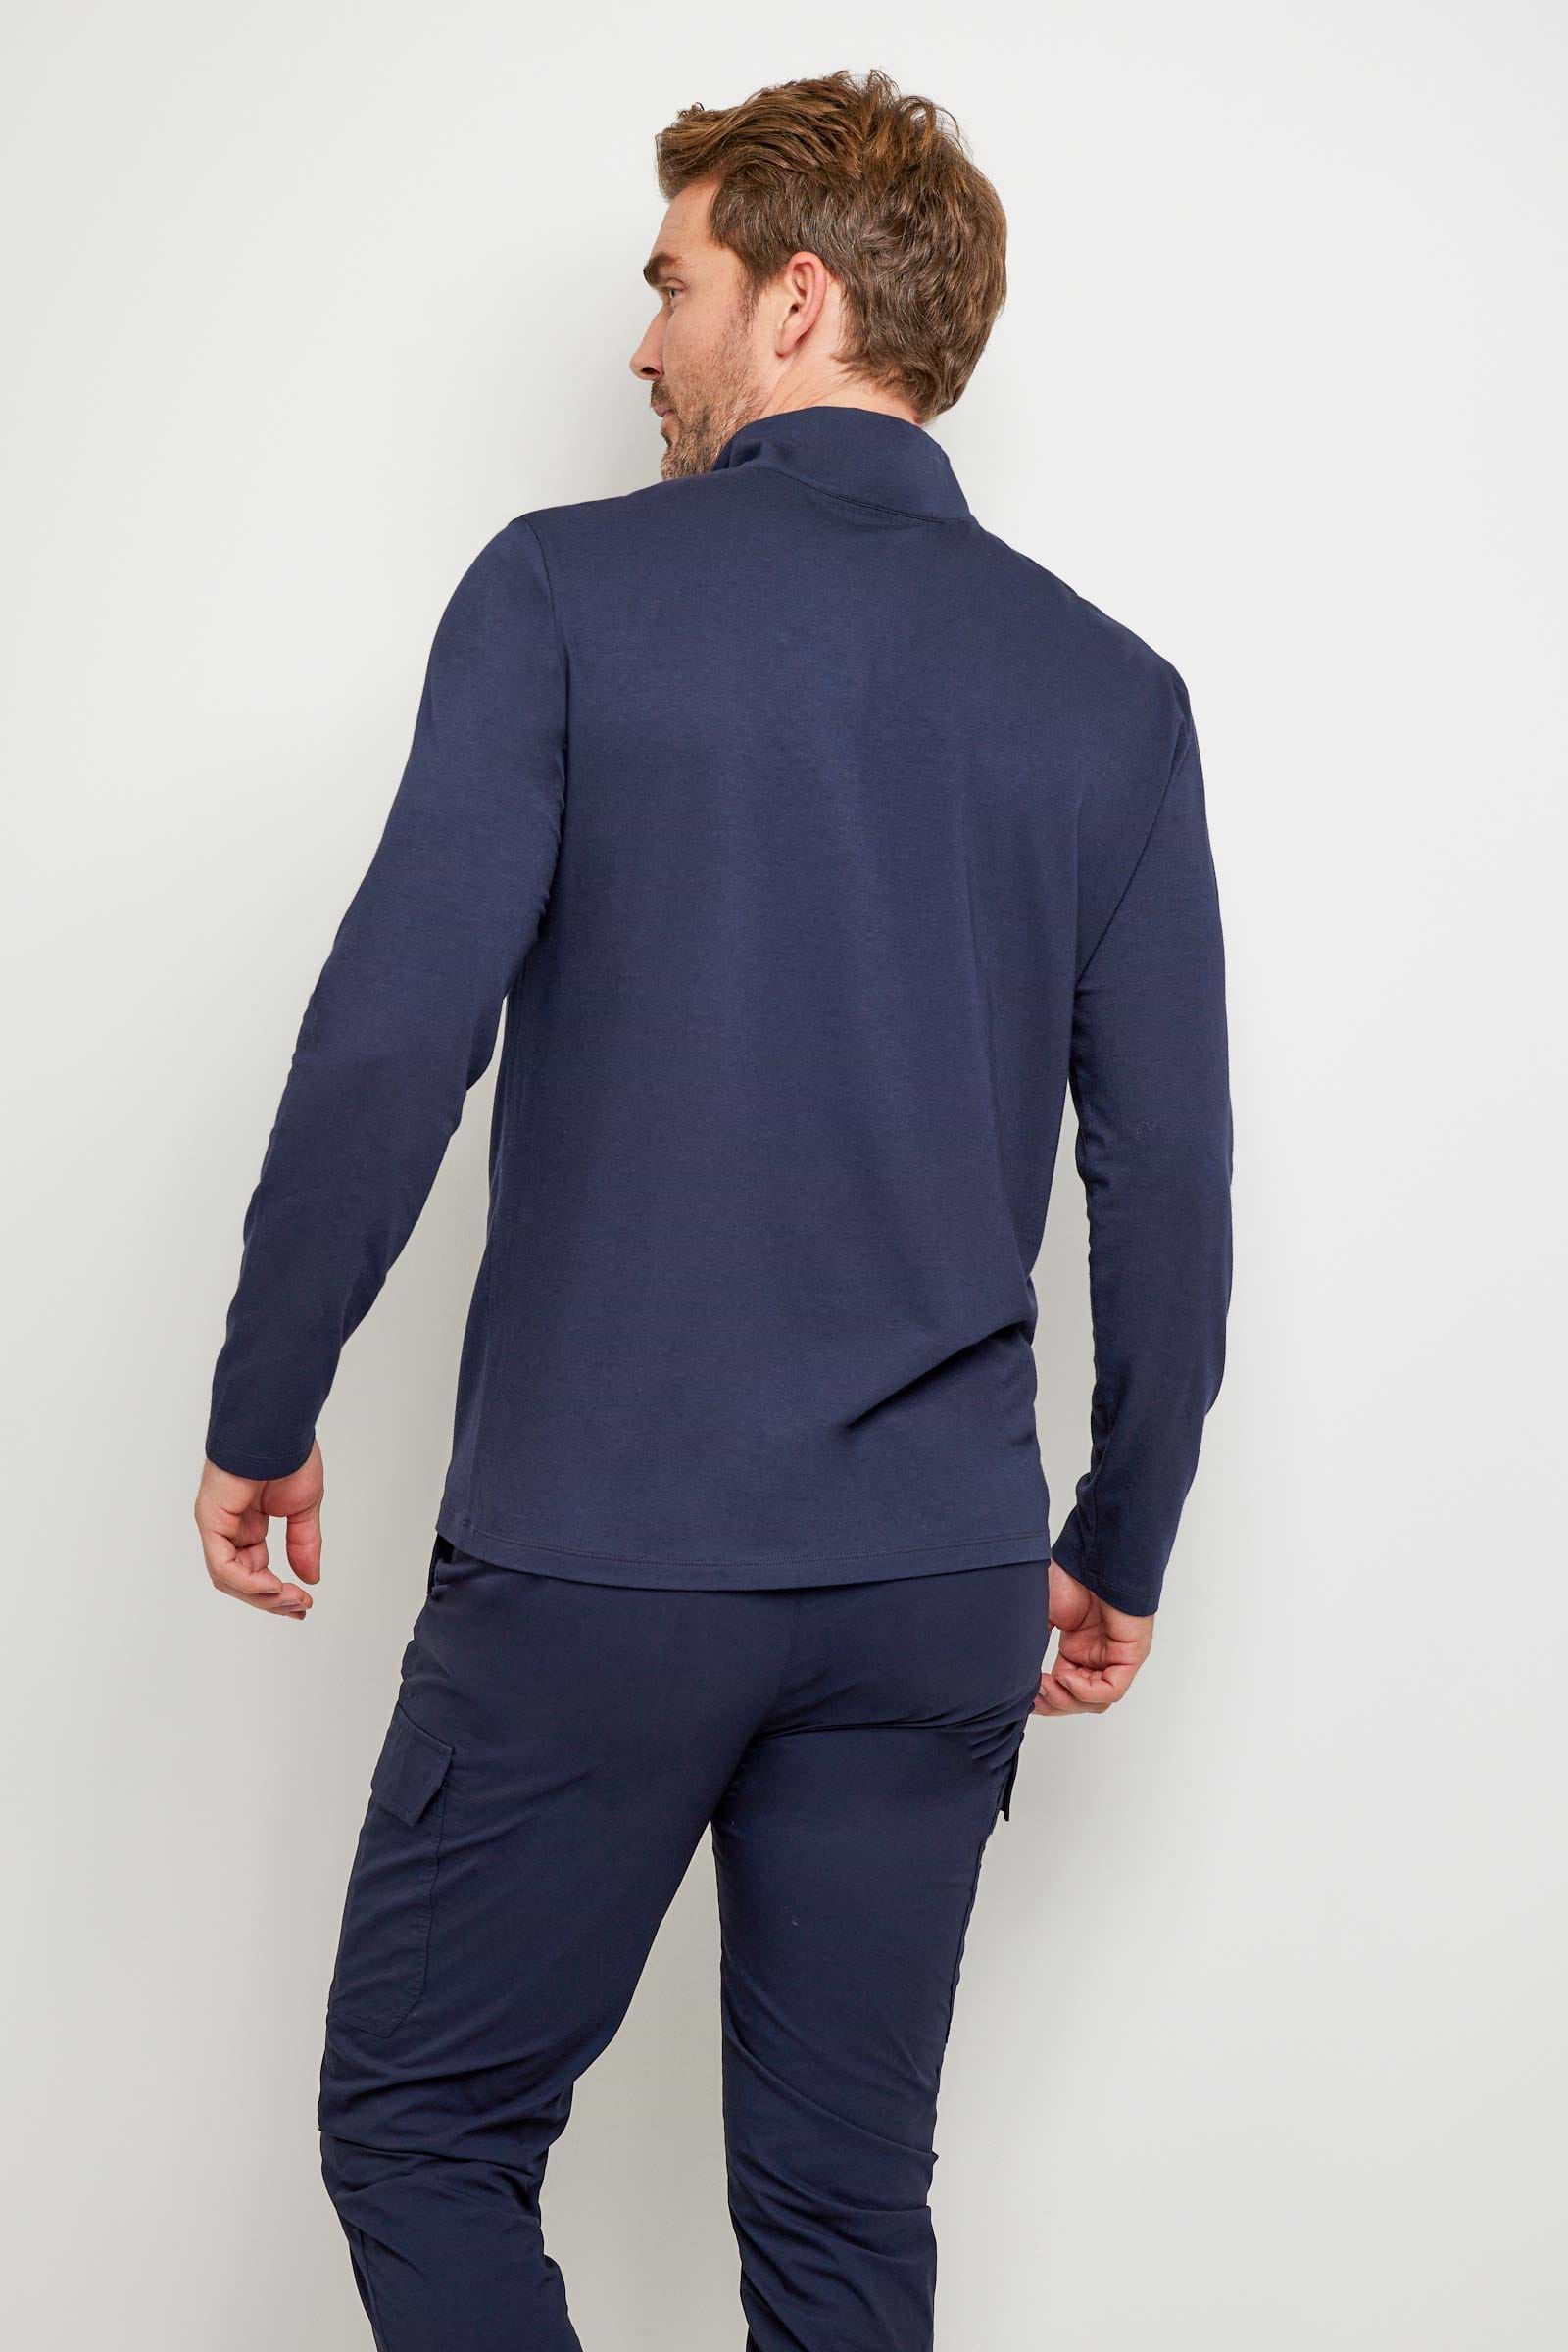 The Best Travel Top. Man Showing the Back Profile of a Men's Charlie Top in Navy.